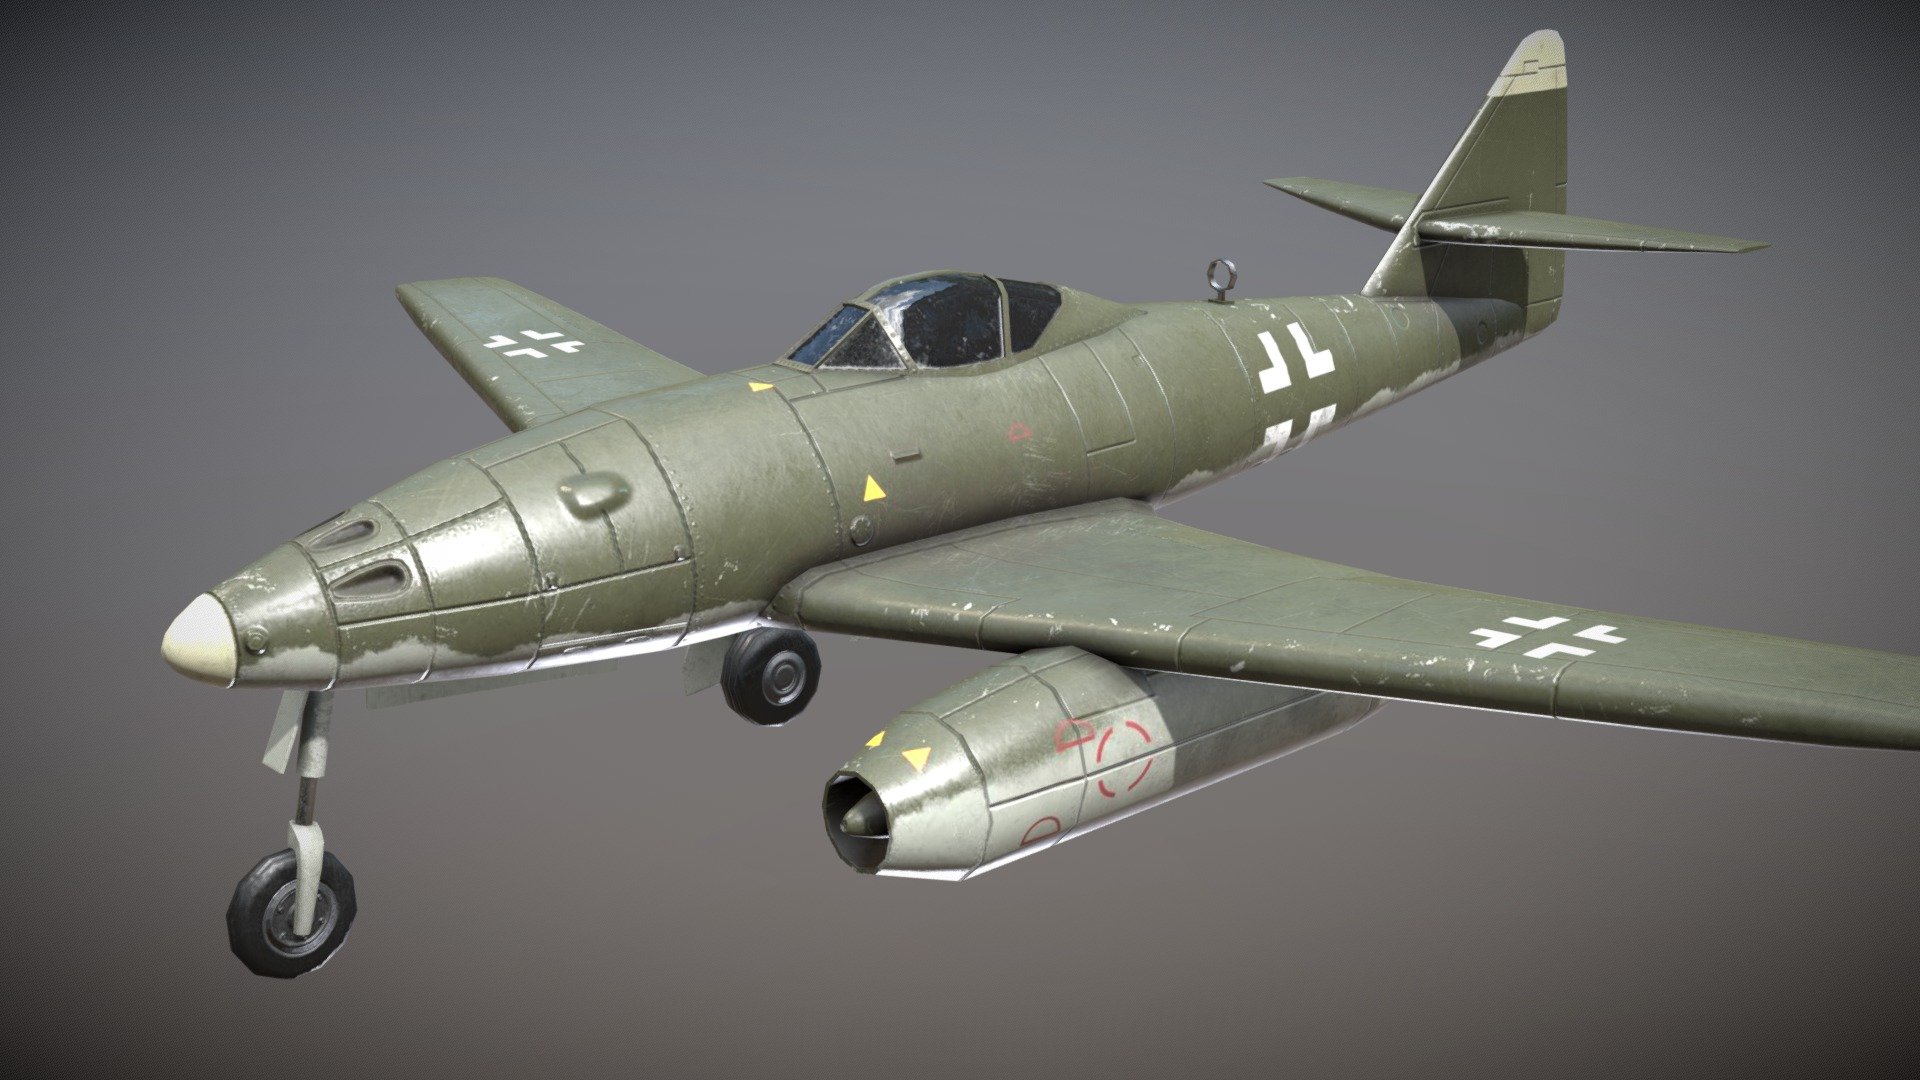 WW2 German Jet-Powered Fighter Aircraft Me-262